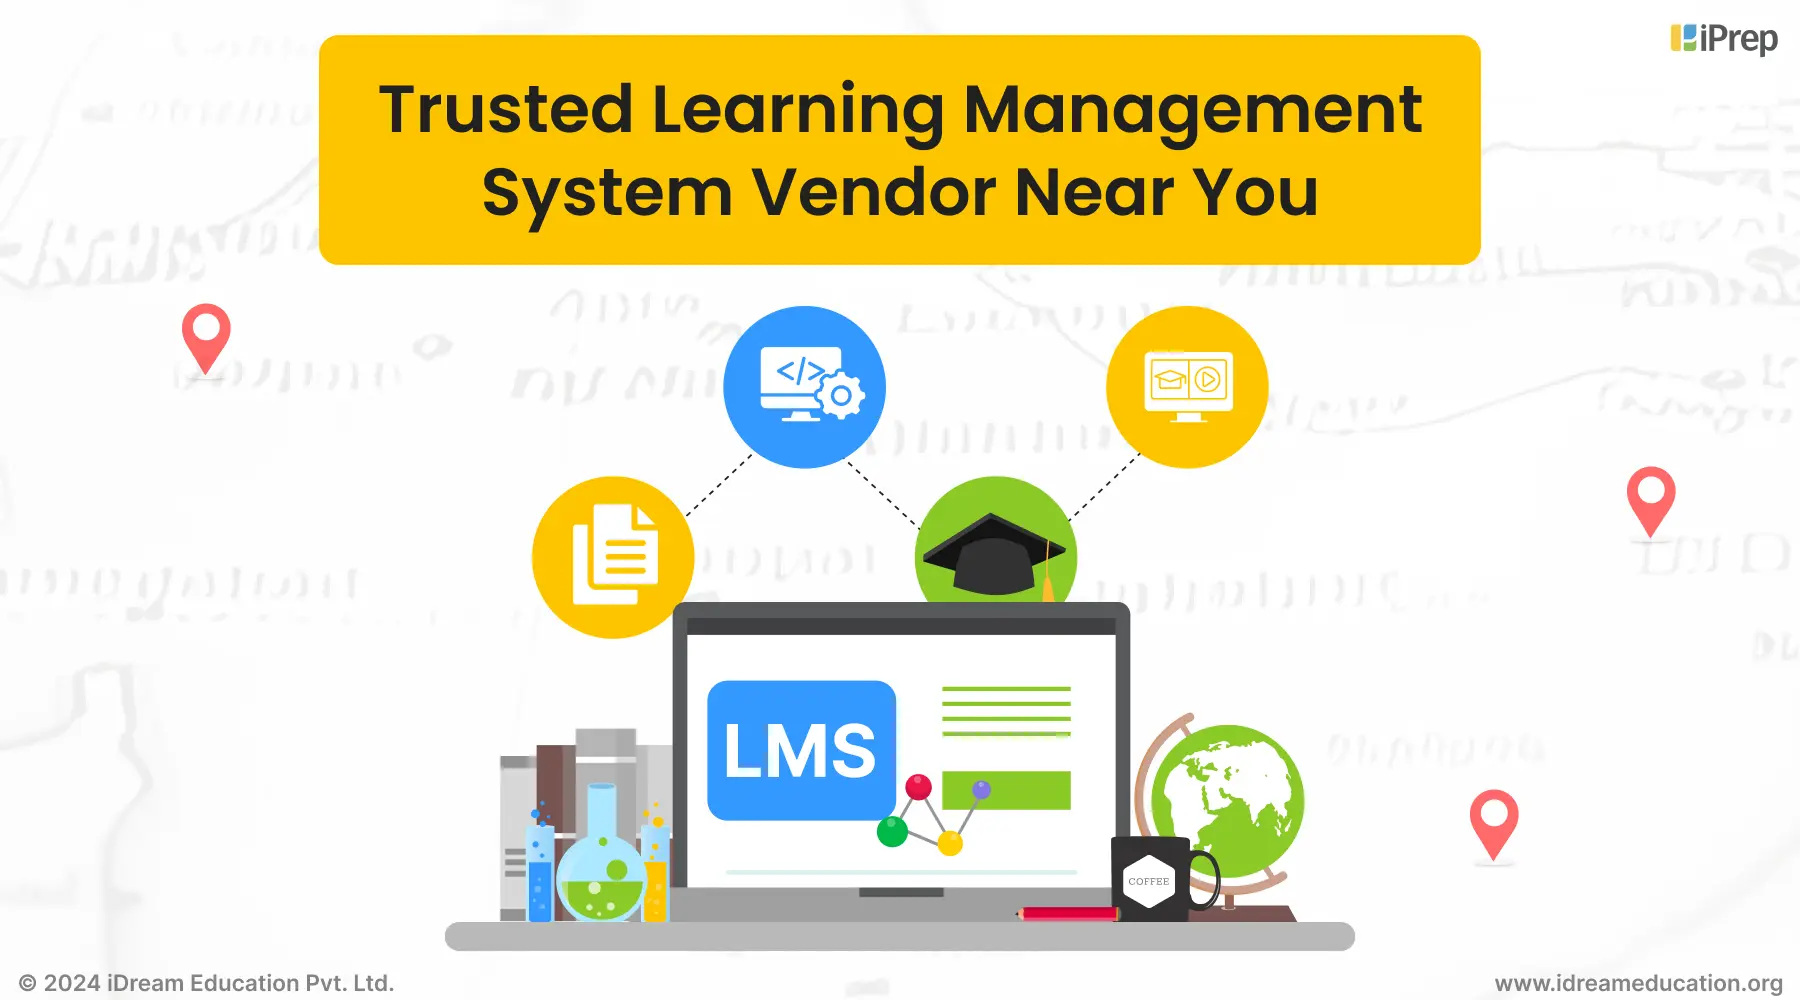 An image demonstrating a trusted learning management system vendor near you